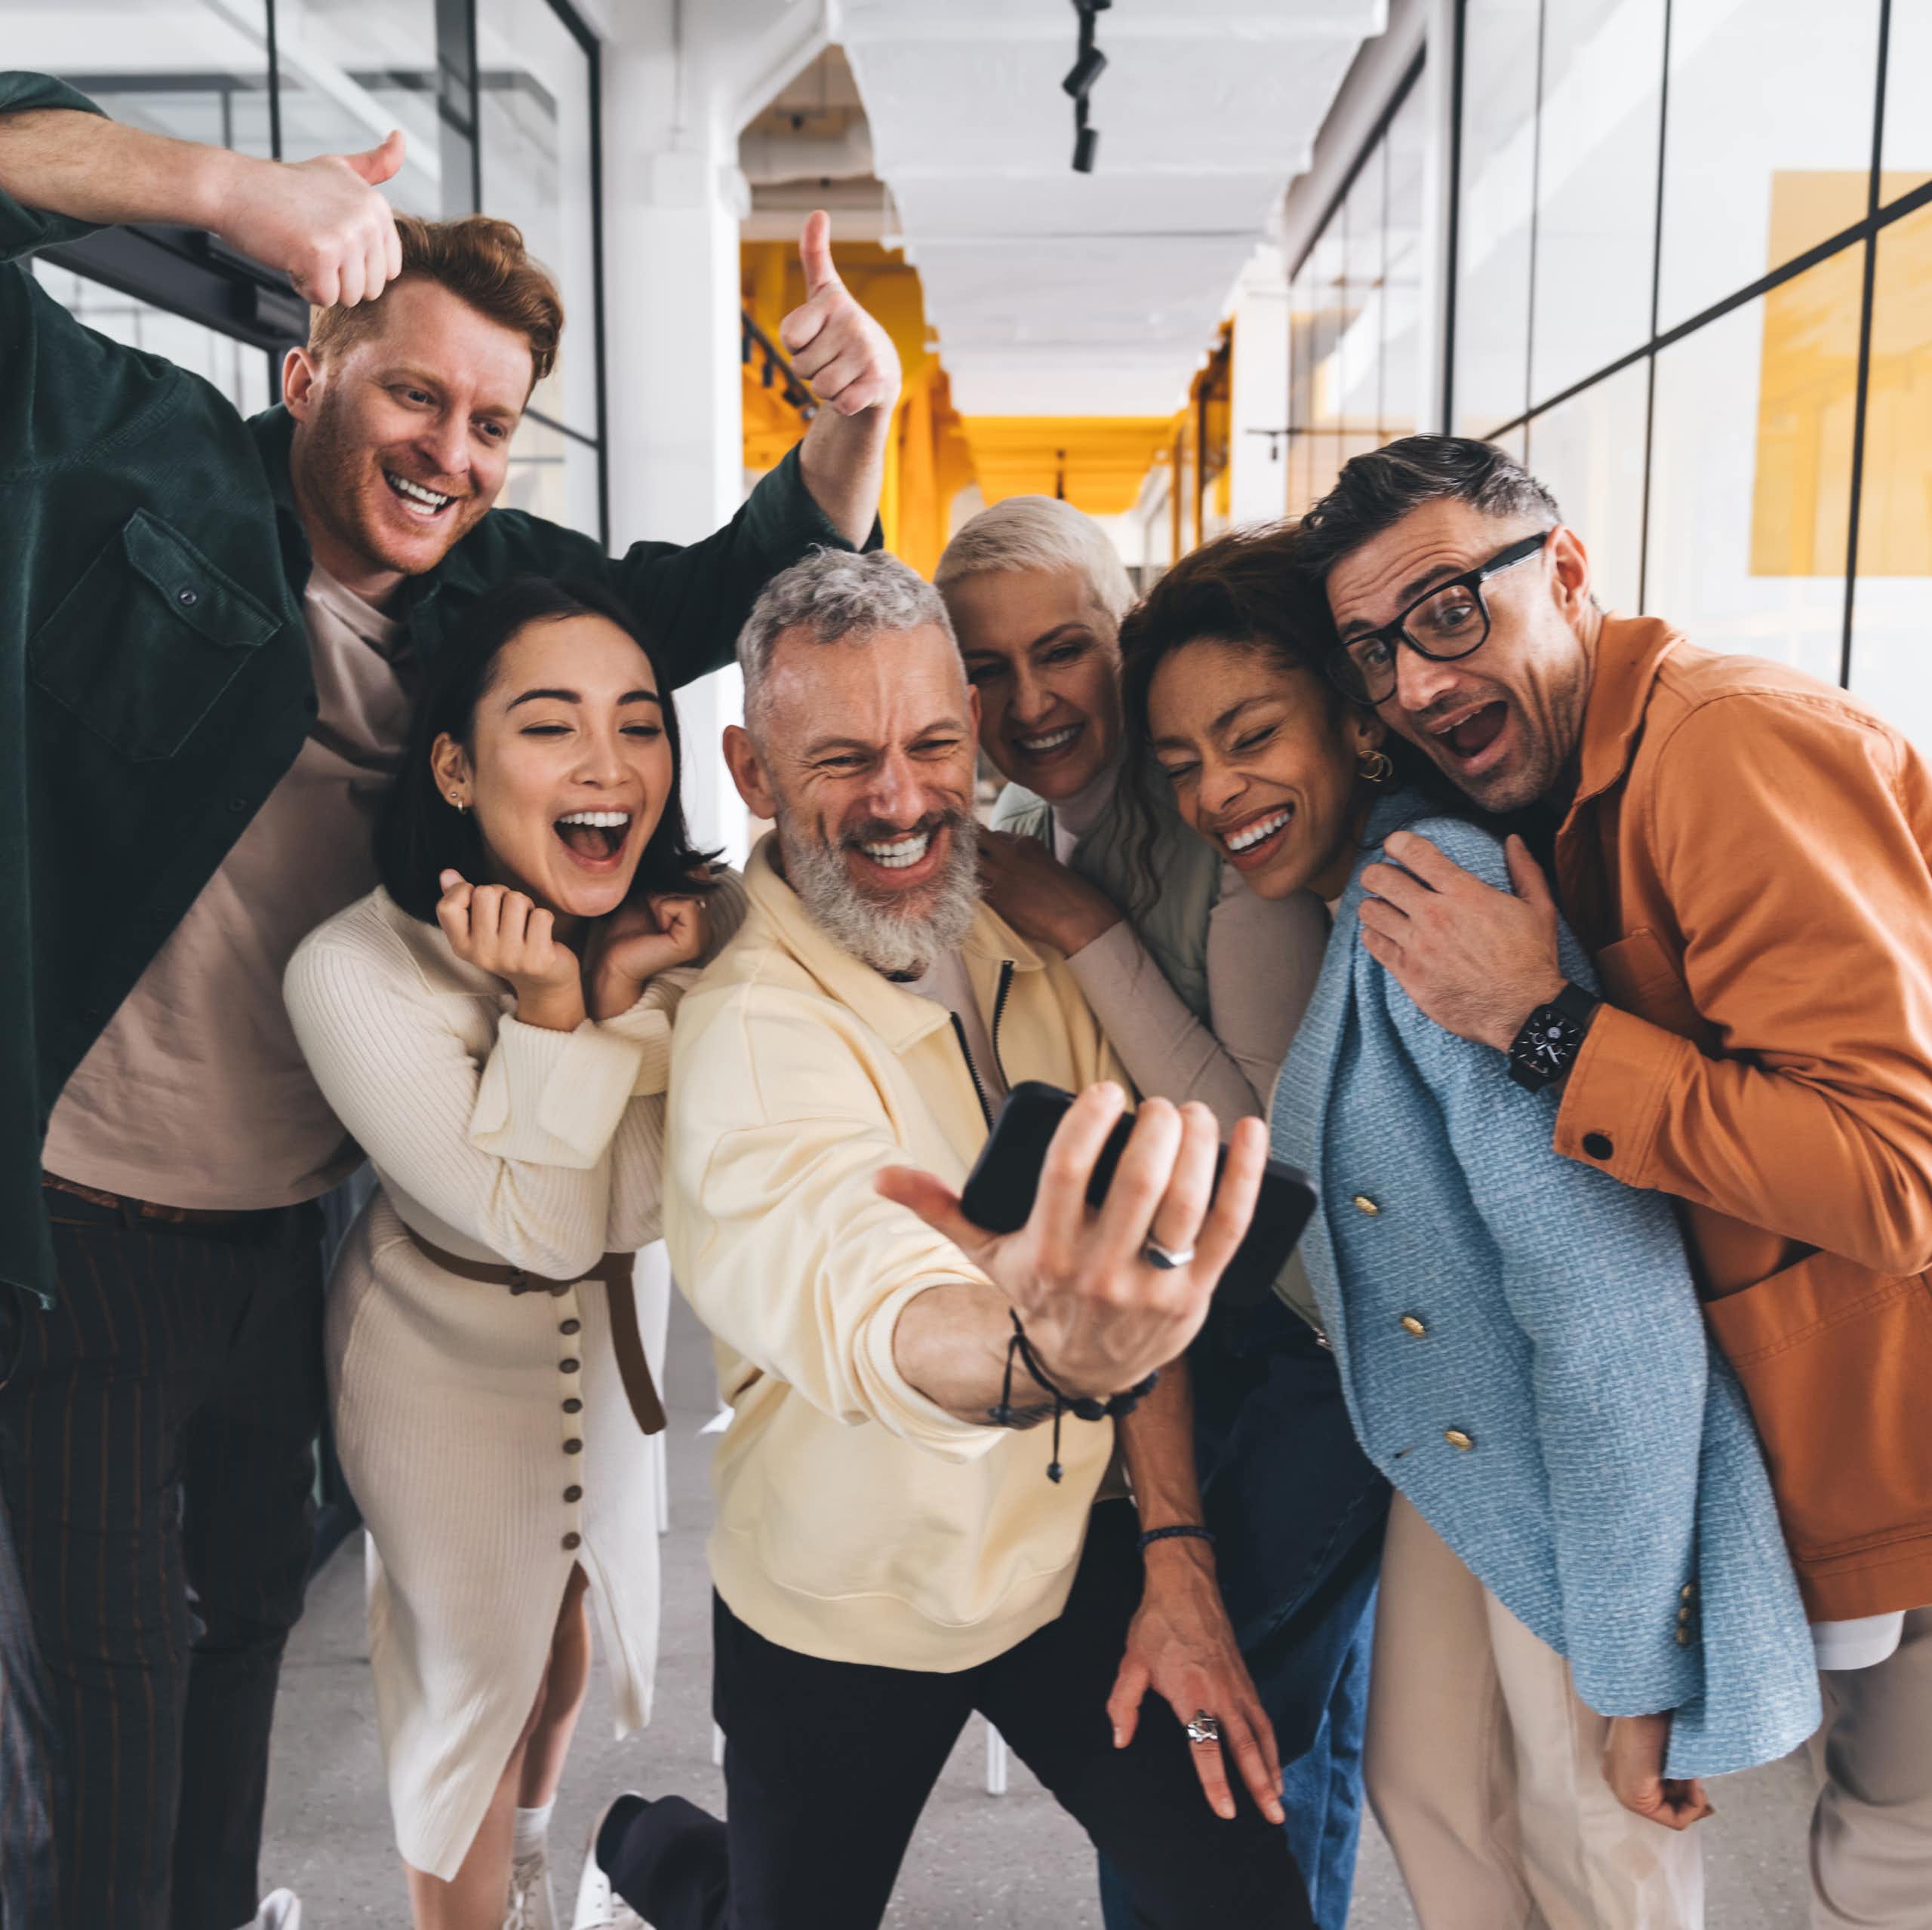 A group of smiling coworkers taking a selfie together in the office